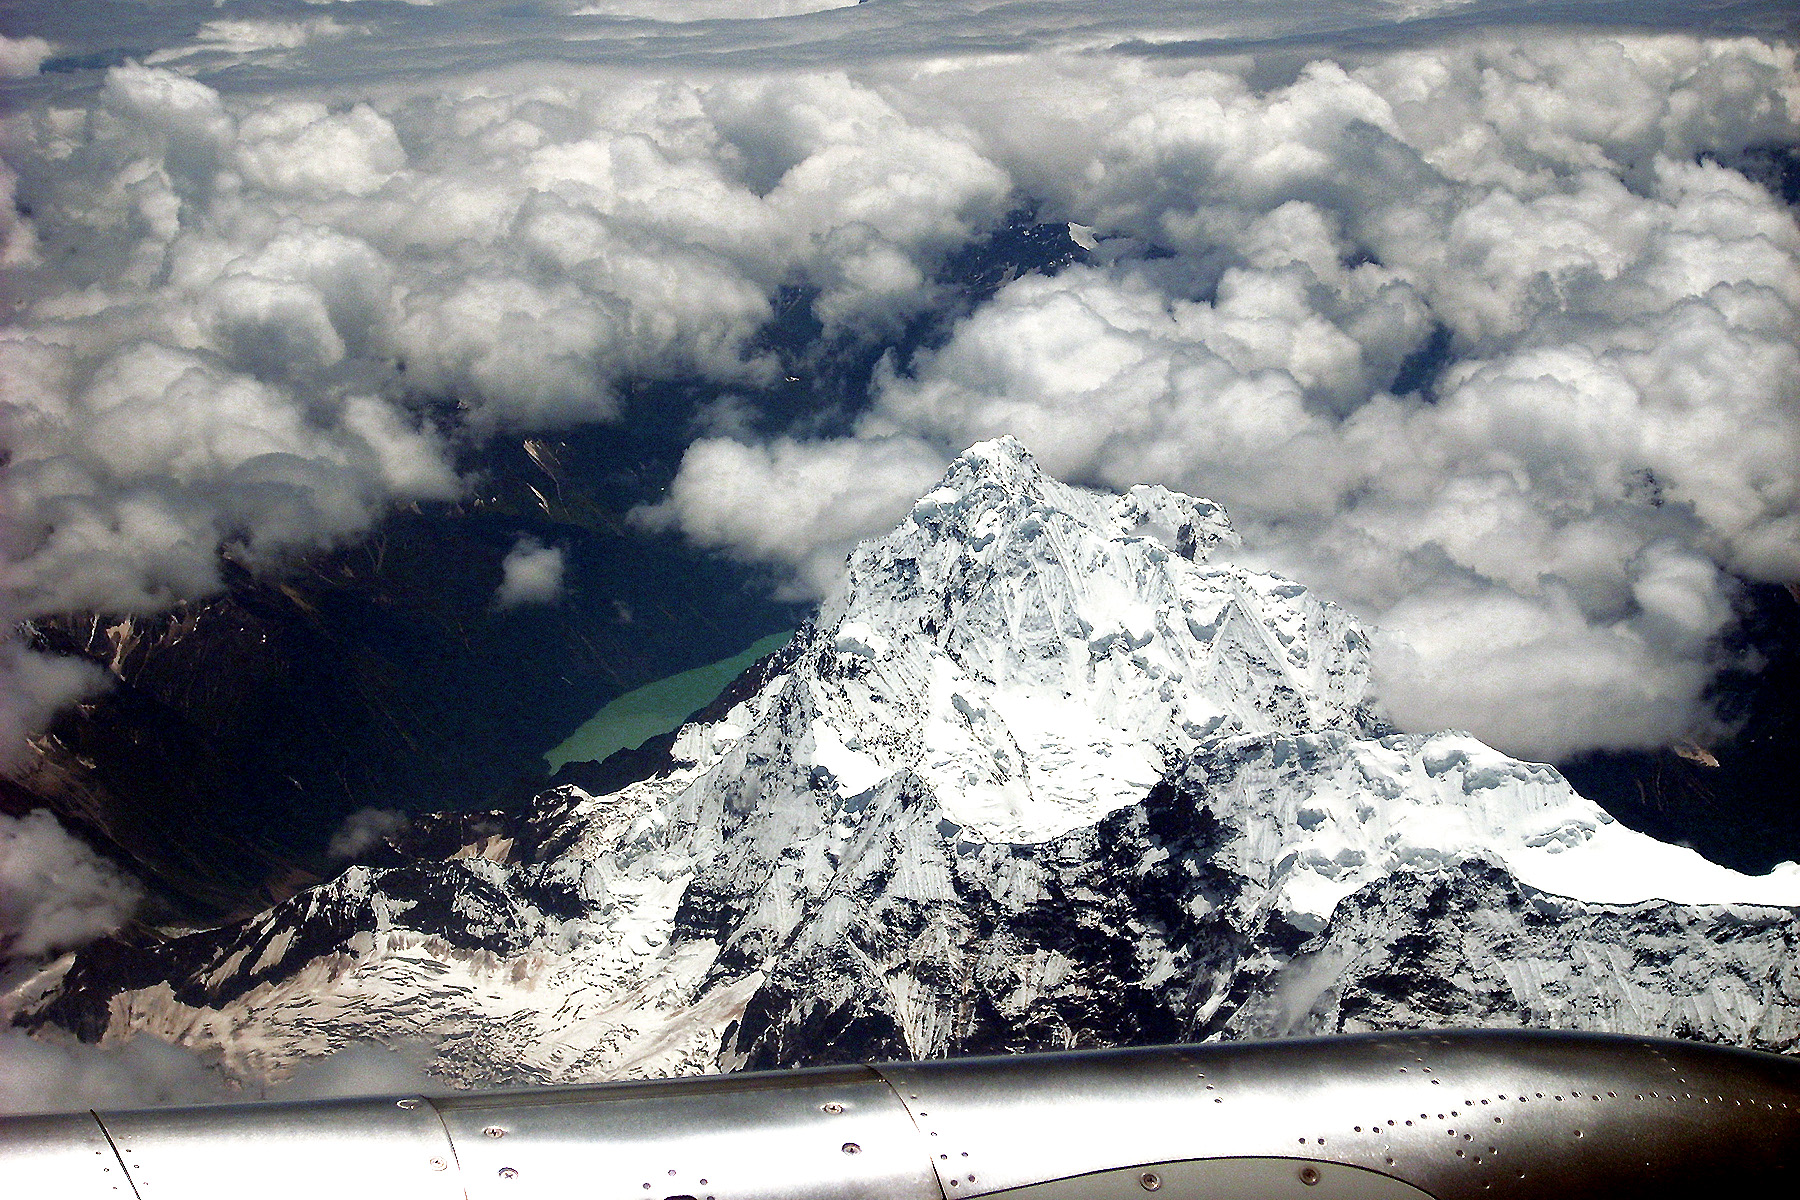 A059B - Airview of Mountain in Tibet - 0854.jpg